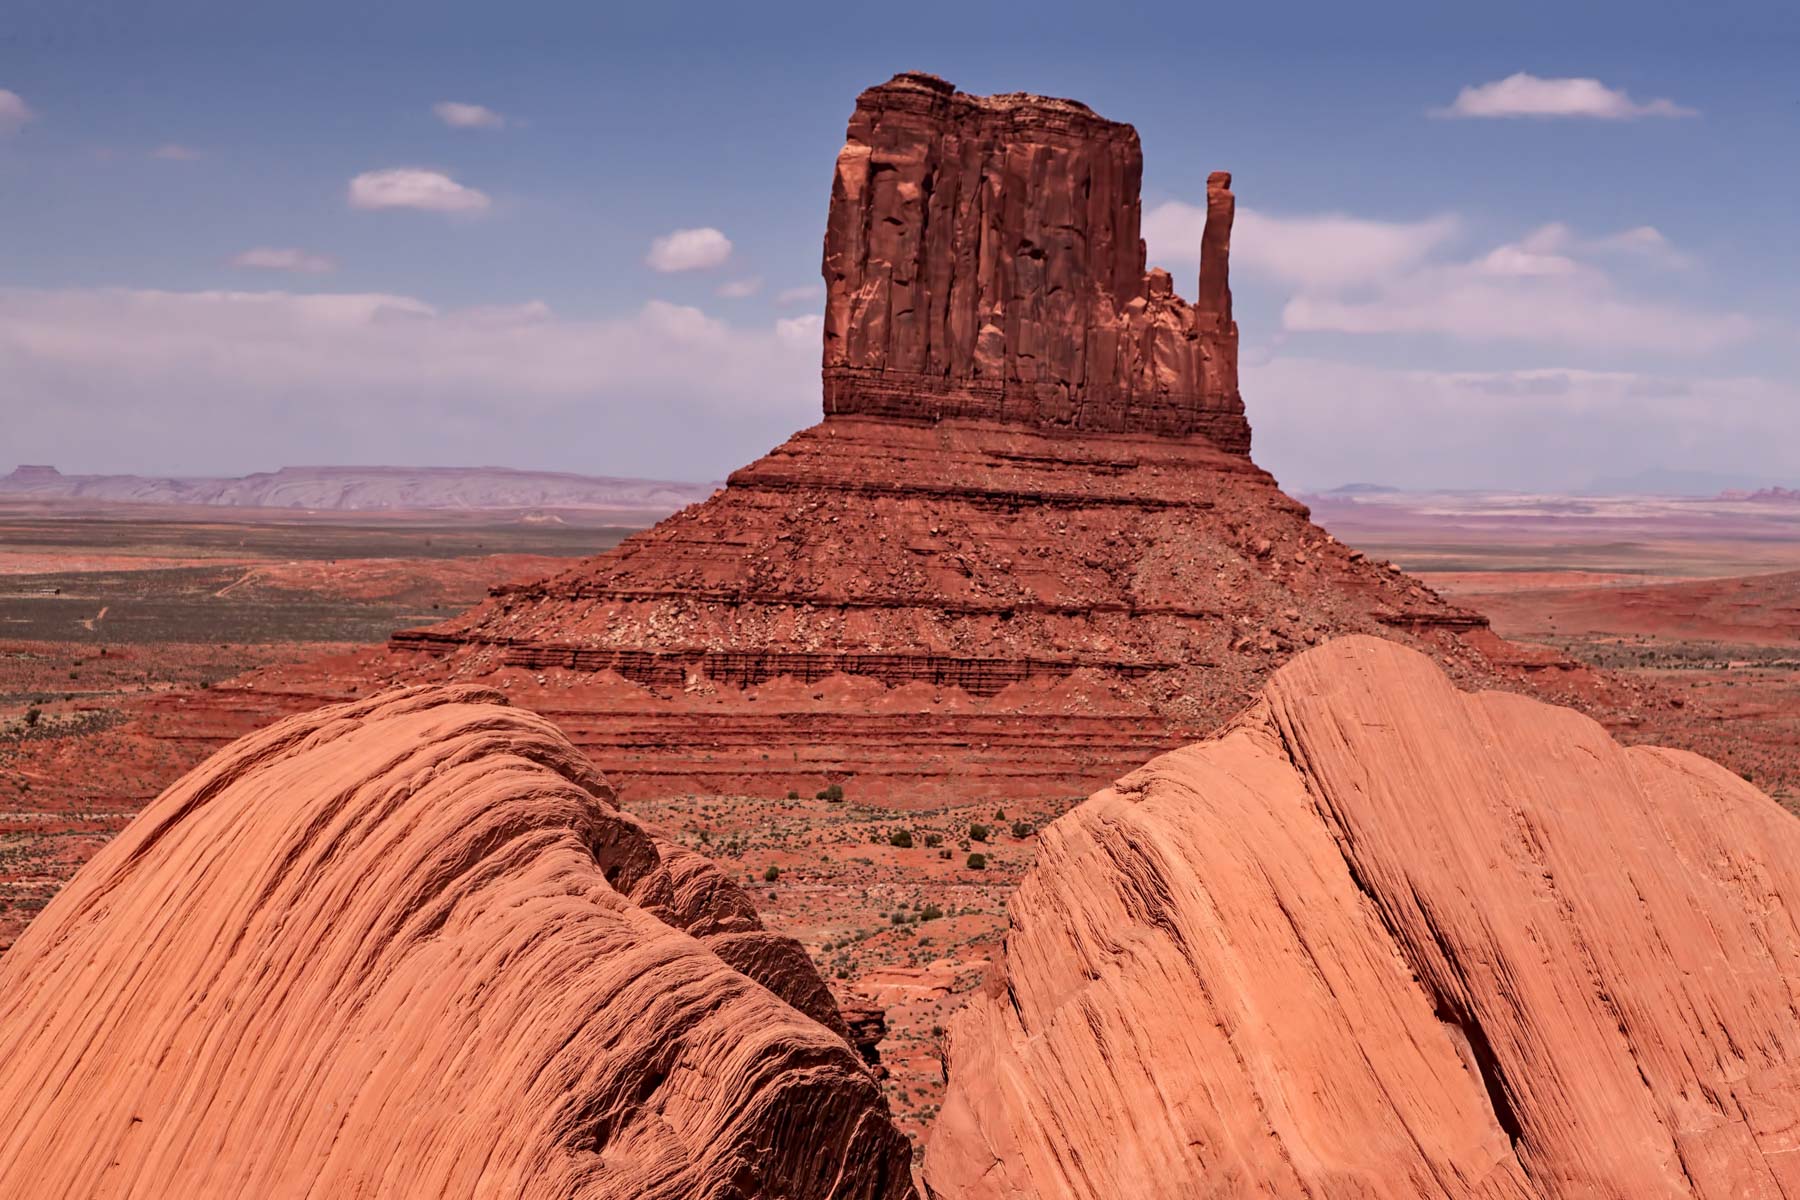 Classic shot of the West Mitten as seen from the Monument Valley parking lot